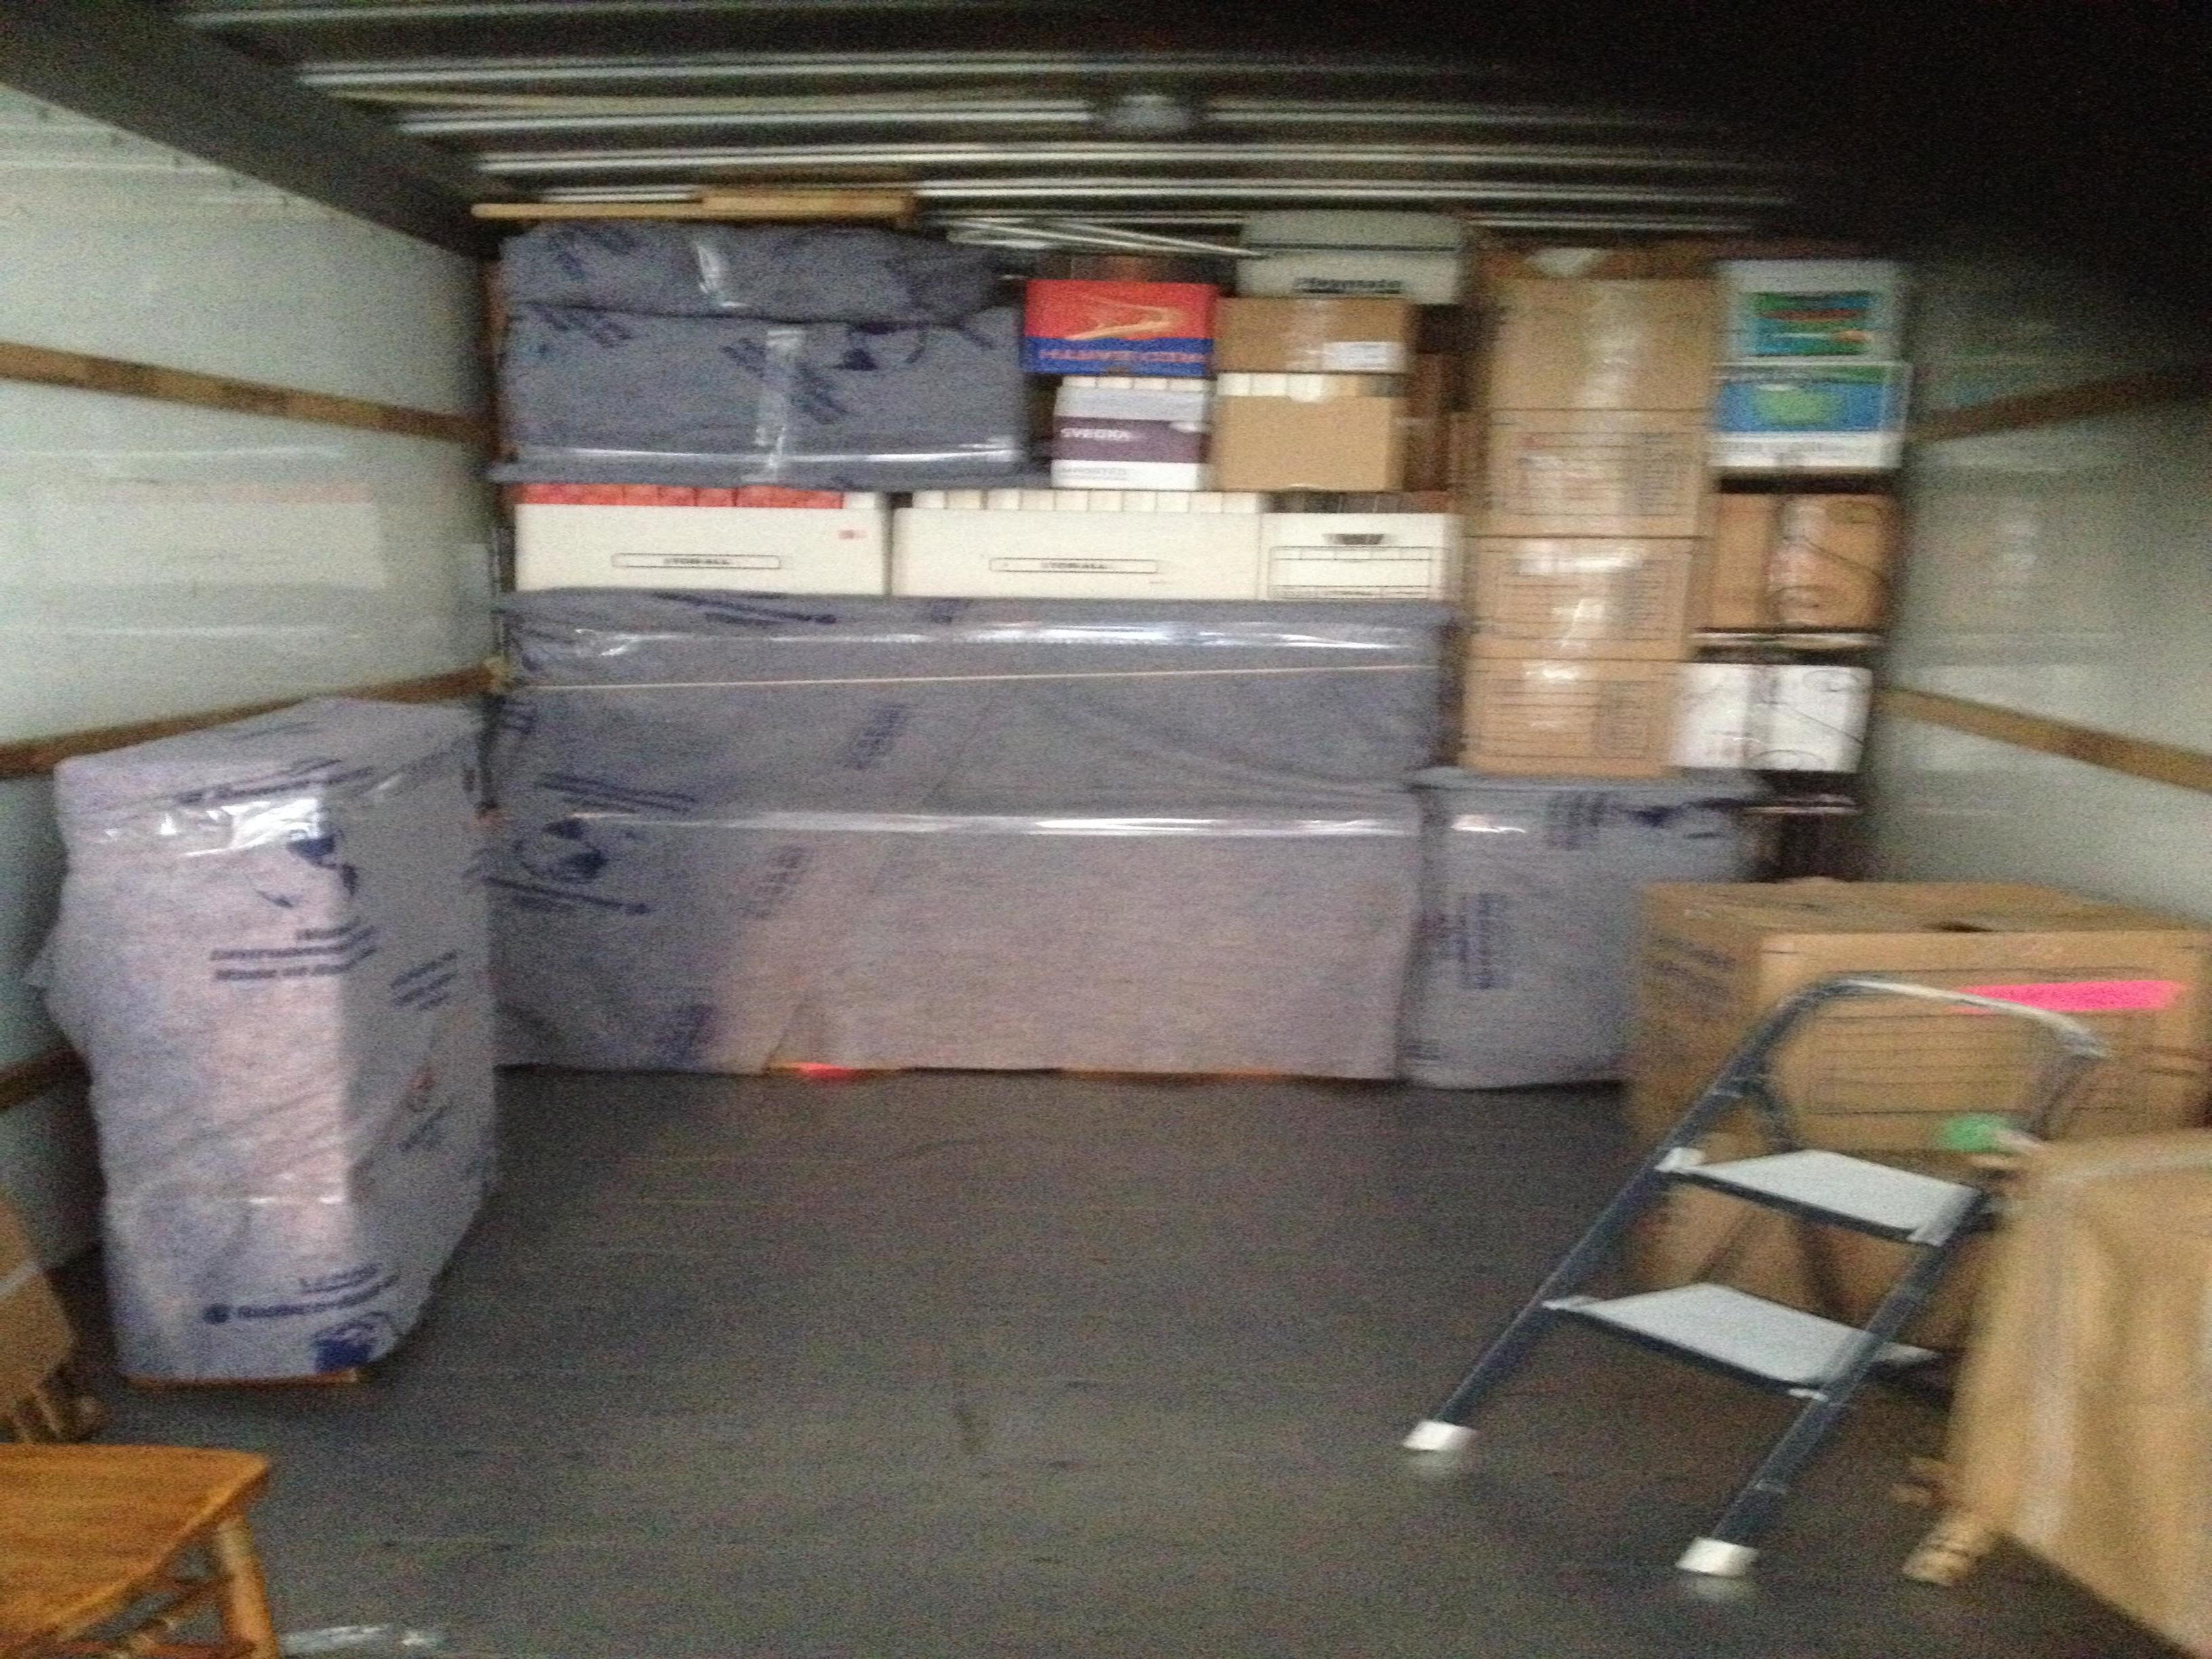 L.O.T.S. Moving is a highly skilled logistical specialist. We specialize in moving heavy items and s Lake of the Sky Moving and Cleaning Services South Lake Tahoe (530)356-6811